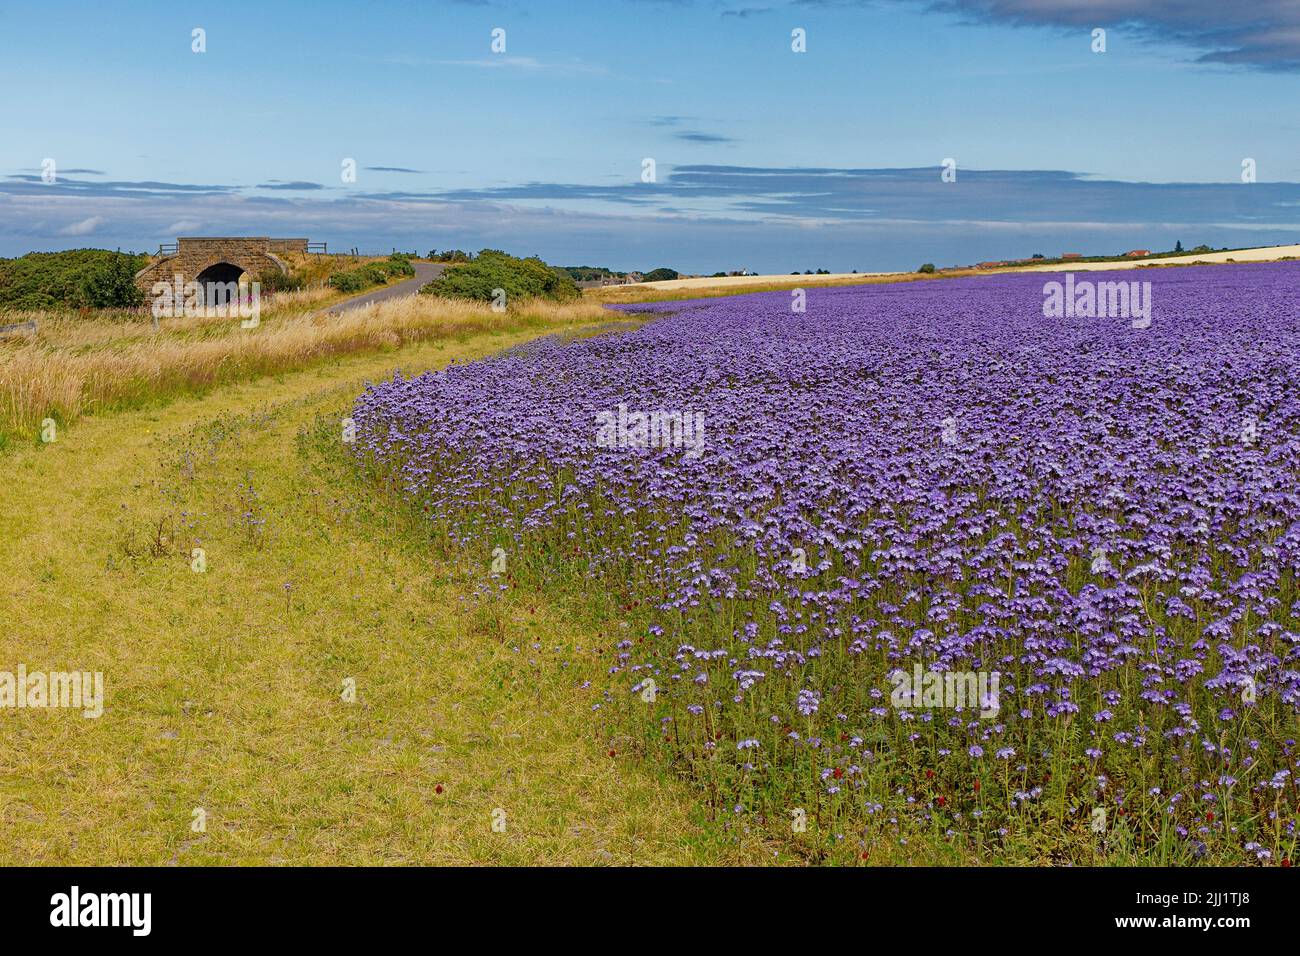 FIELD AND CROP OF BLUE LACY PHACELIA OR PURPLE TANSY PLANTS AND FLOWERS Phacelia tanacetifolia A SUMMER DAY IN HIGHLAND SCOTLAND Stock Photo